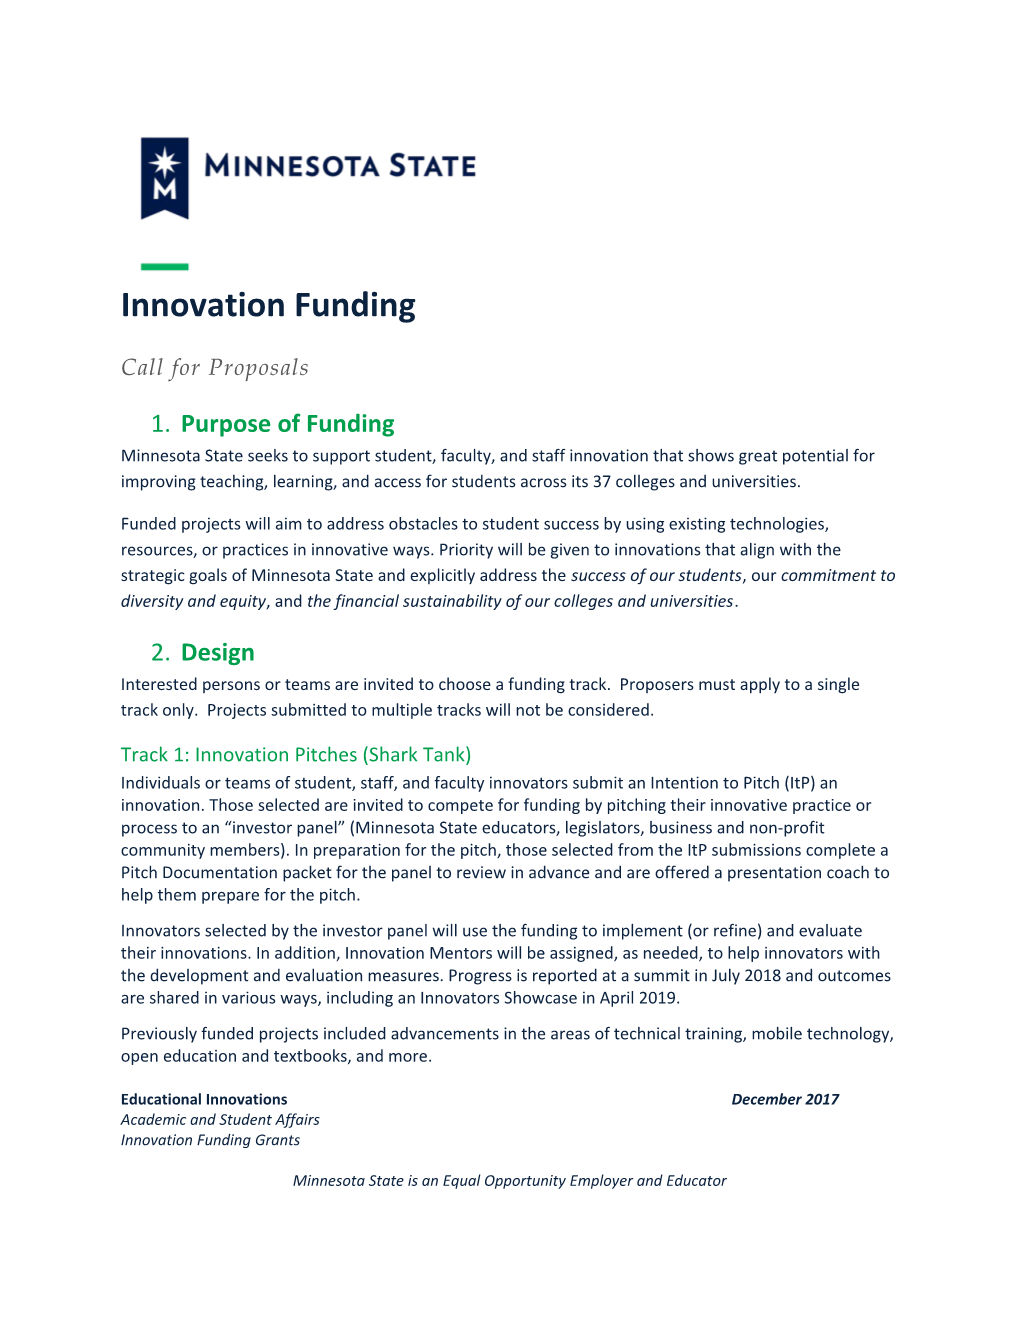 Innovation Funding Call for Proposals